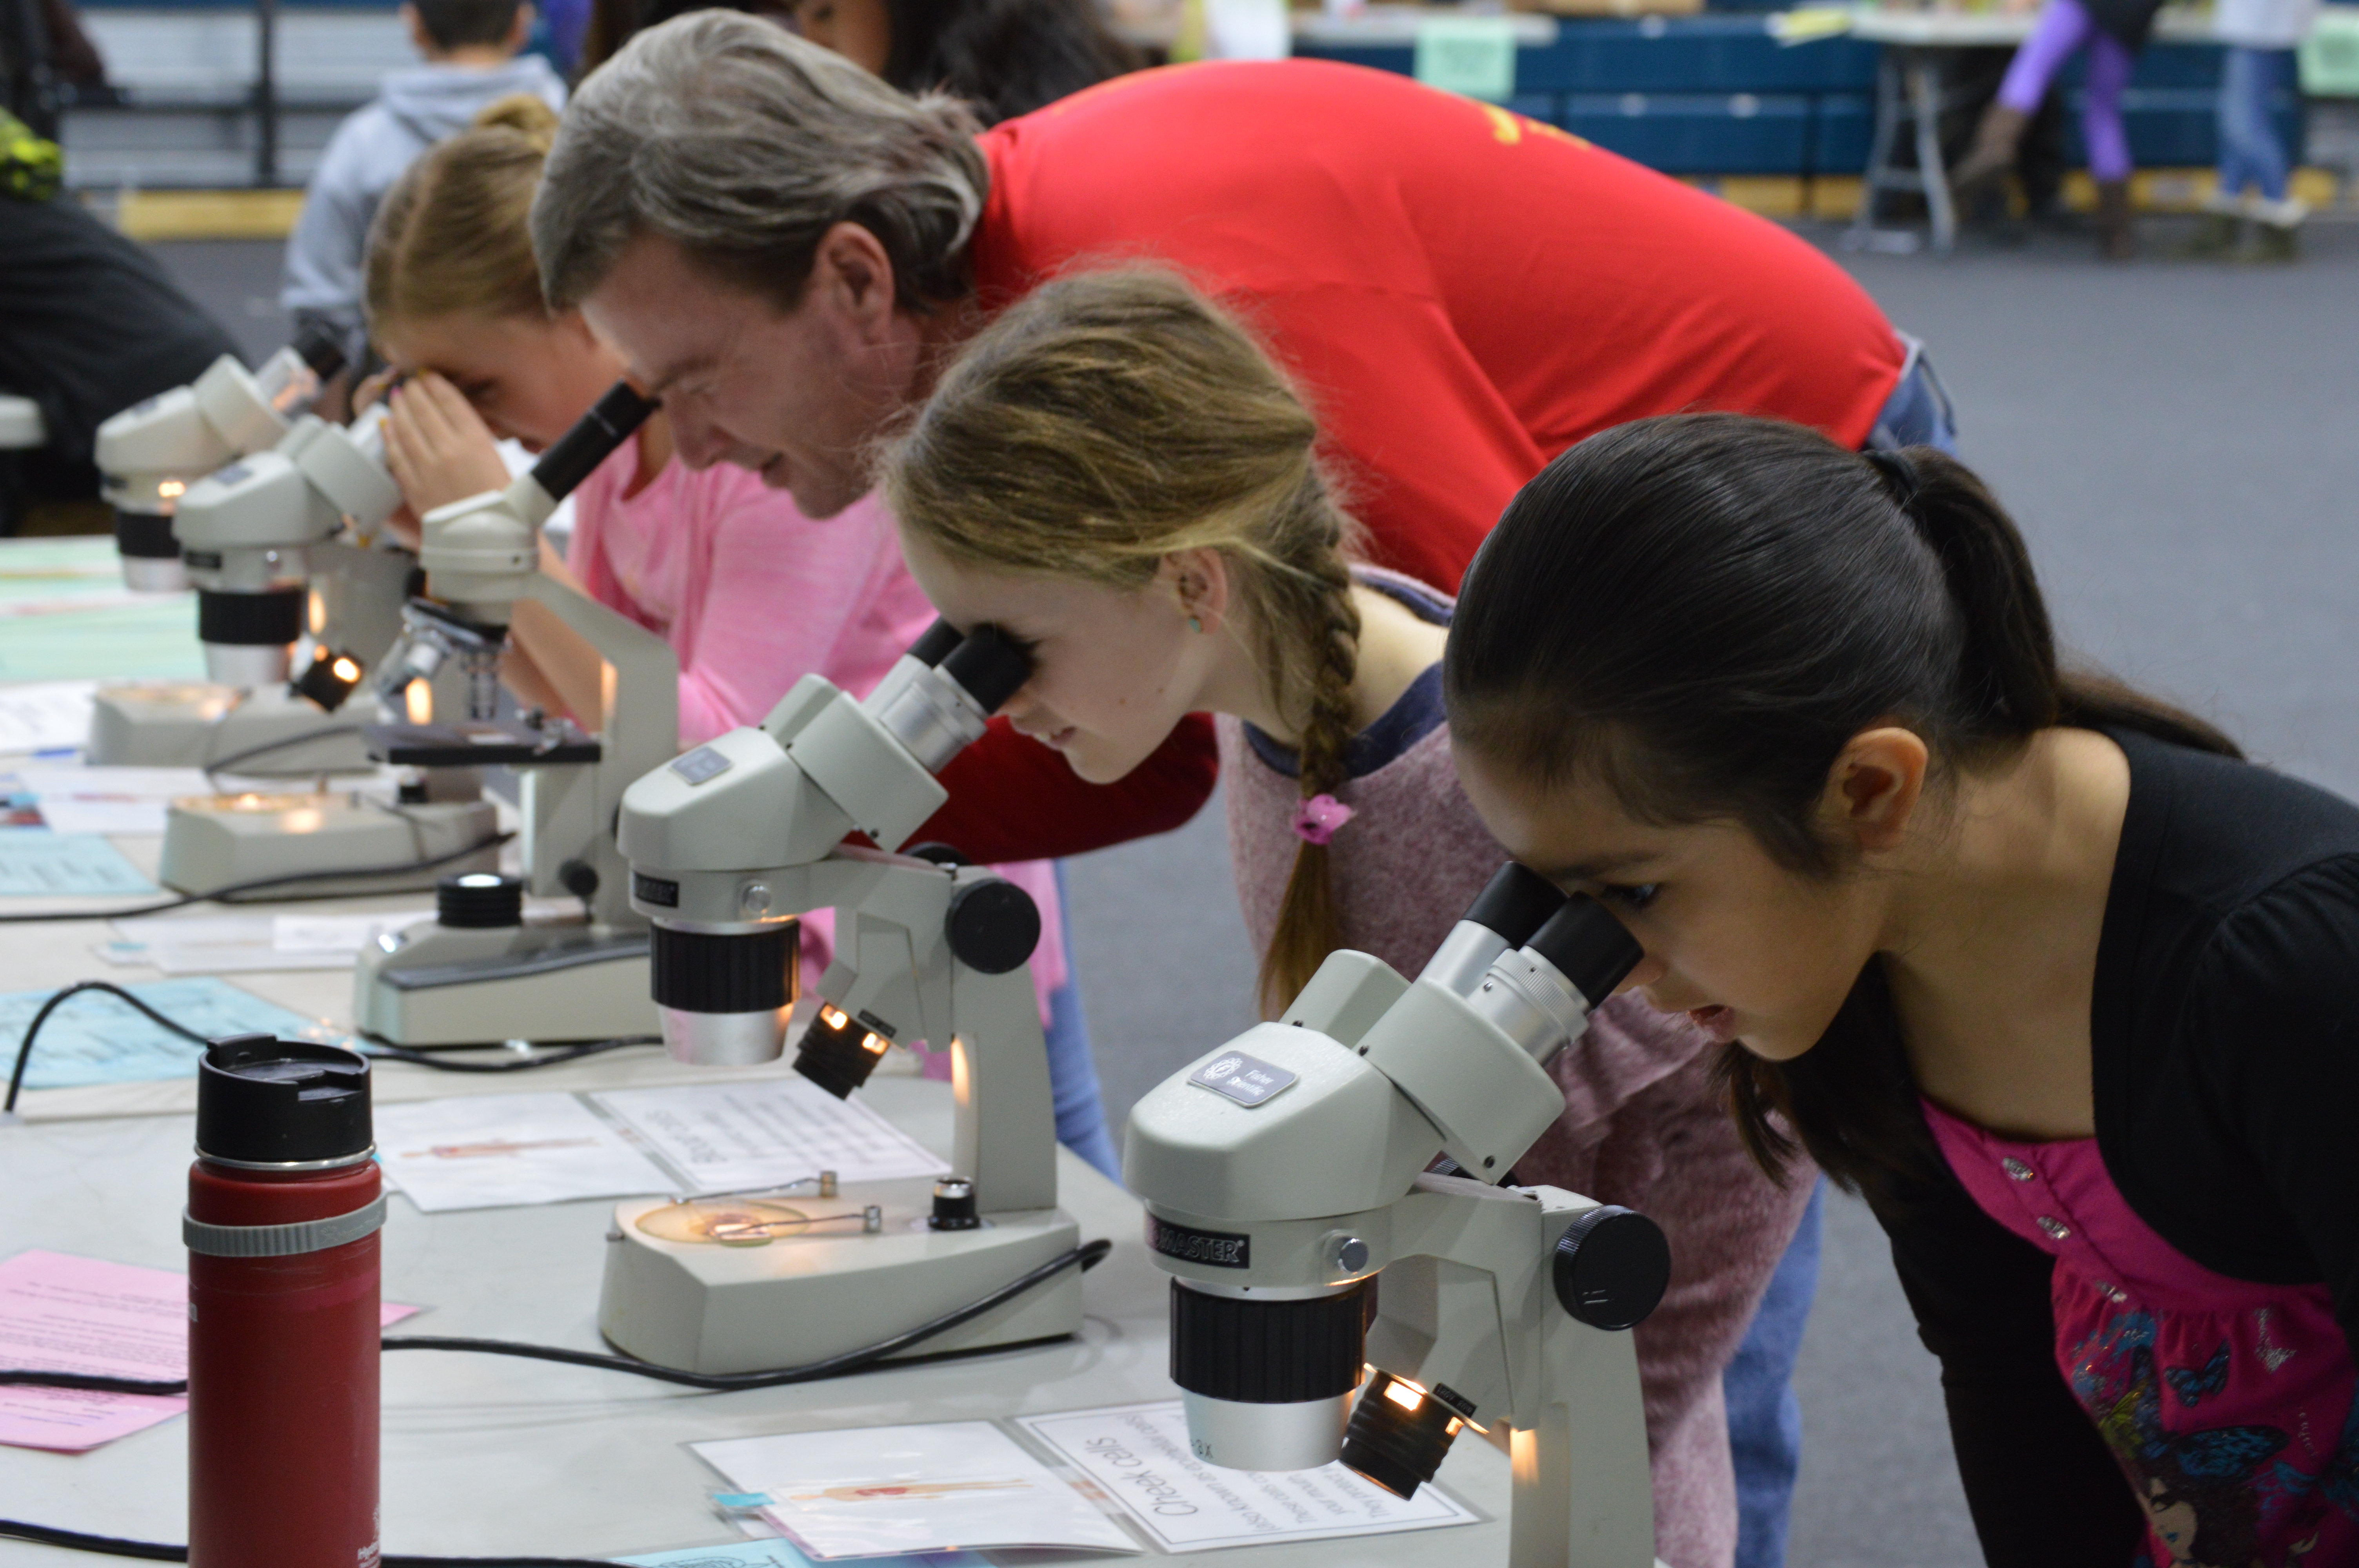 Microscope use at the Science Expo 2018